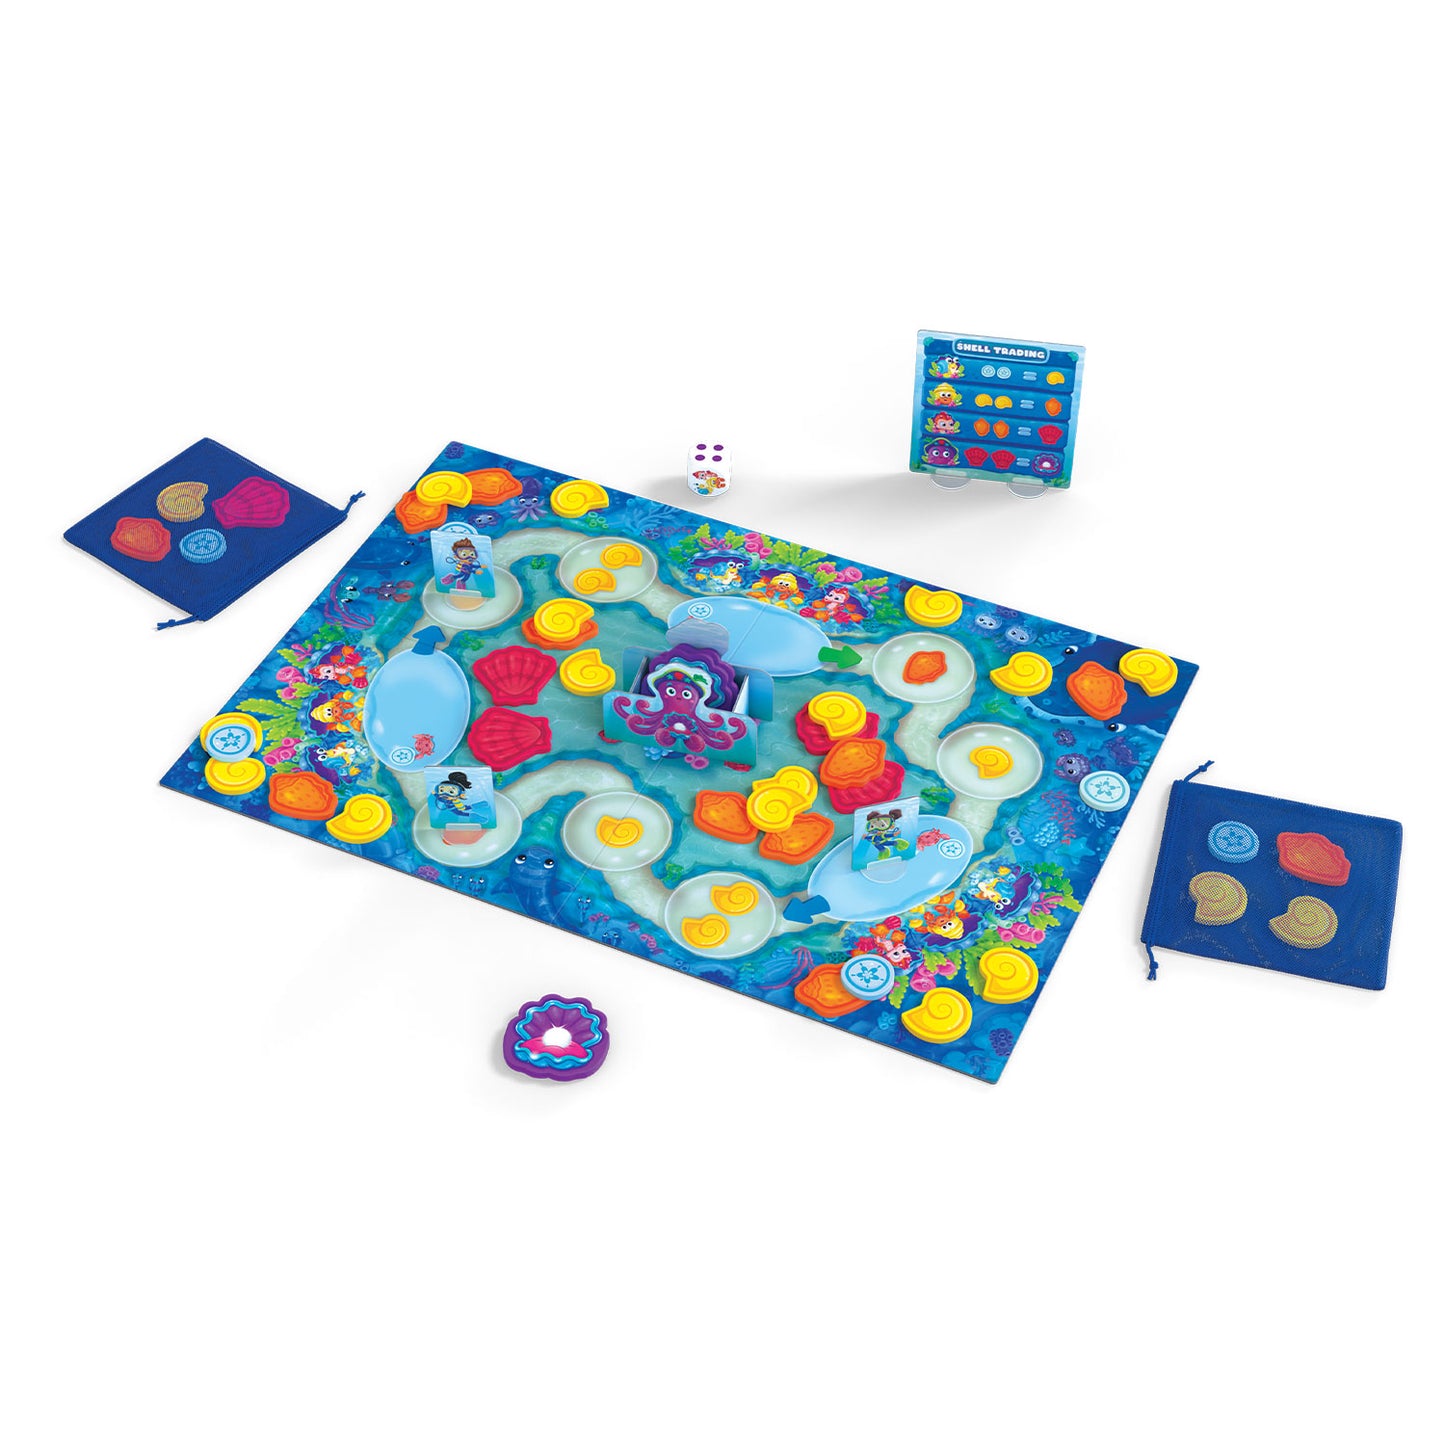 Shelly's Pearl by SimplyFun is an early trading game for ages 4 and up.